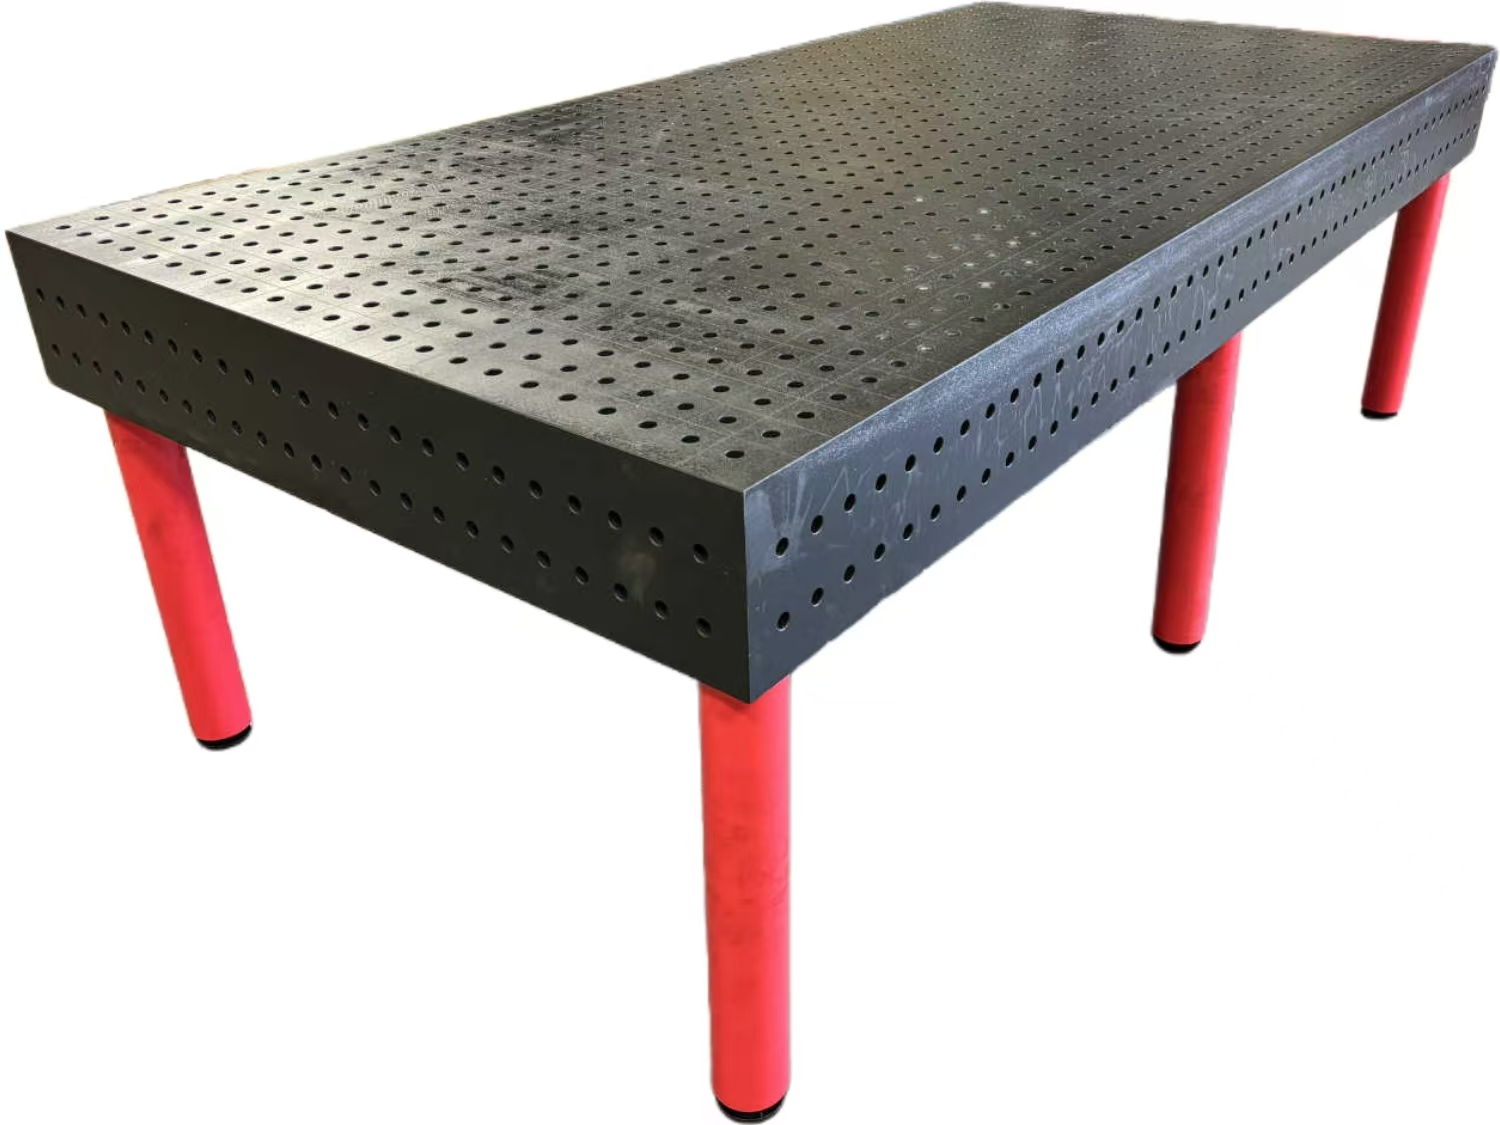 Why should a welding table made of nitrided steel be chosen for welding operations by welders?